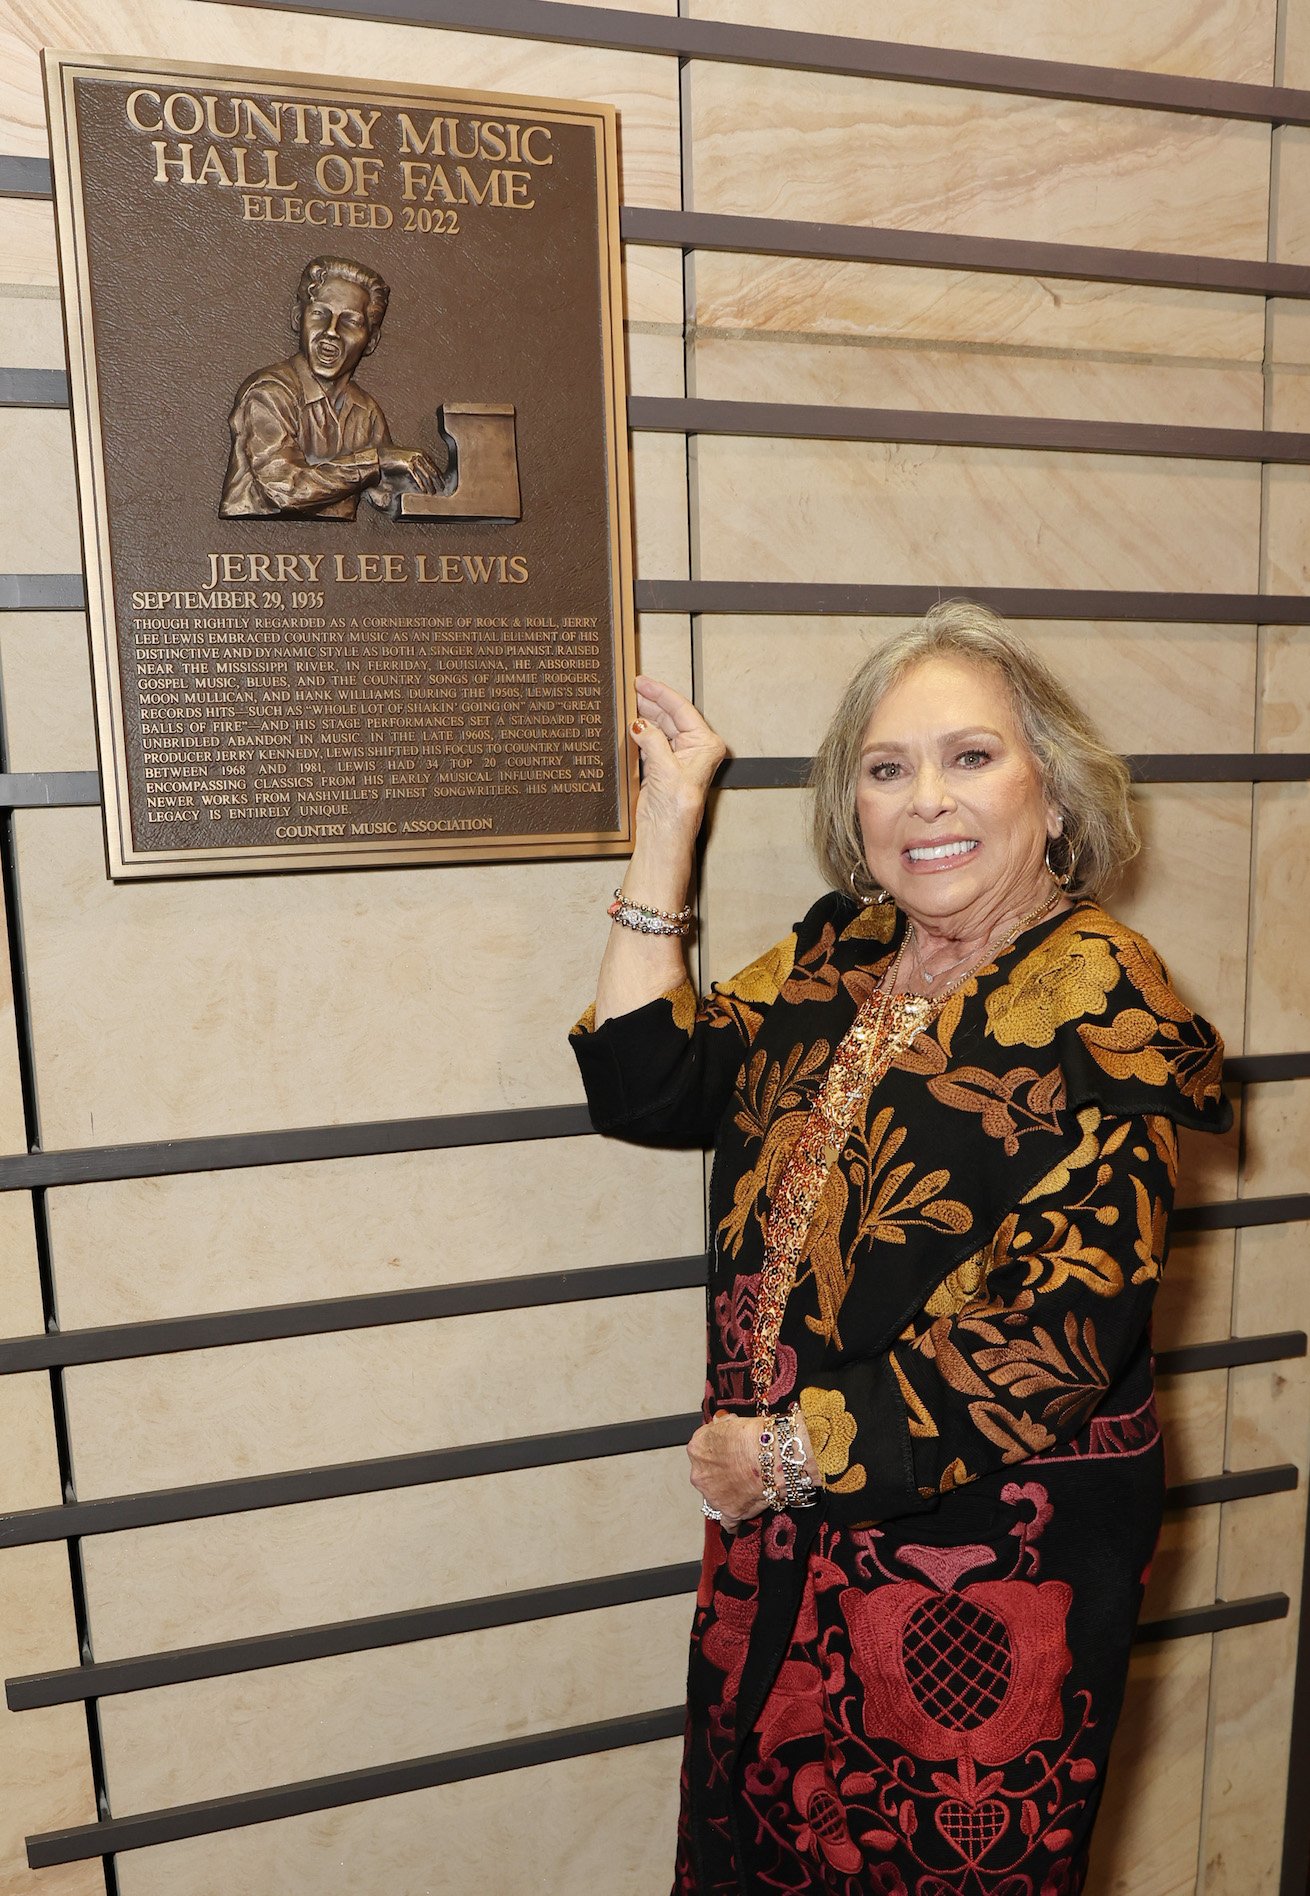 Jerry Lee Lewis' wife, Judith Brown, with a plaque for her husband at the Country Music Hall of Fame and Museum